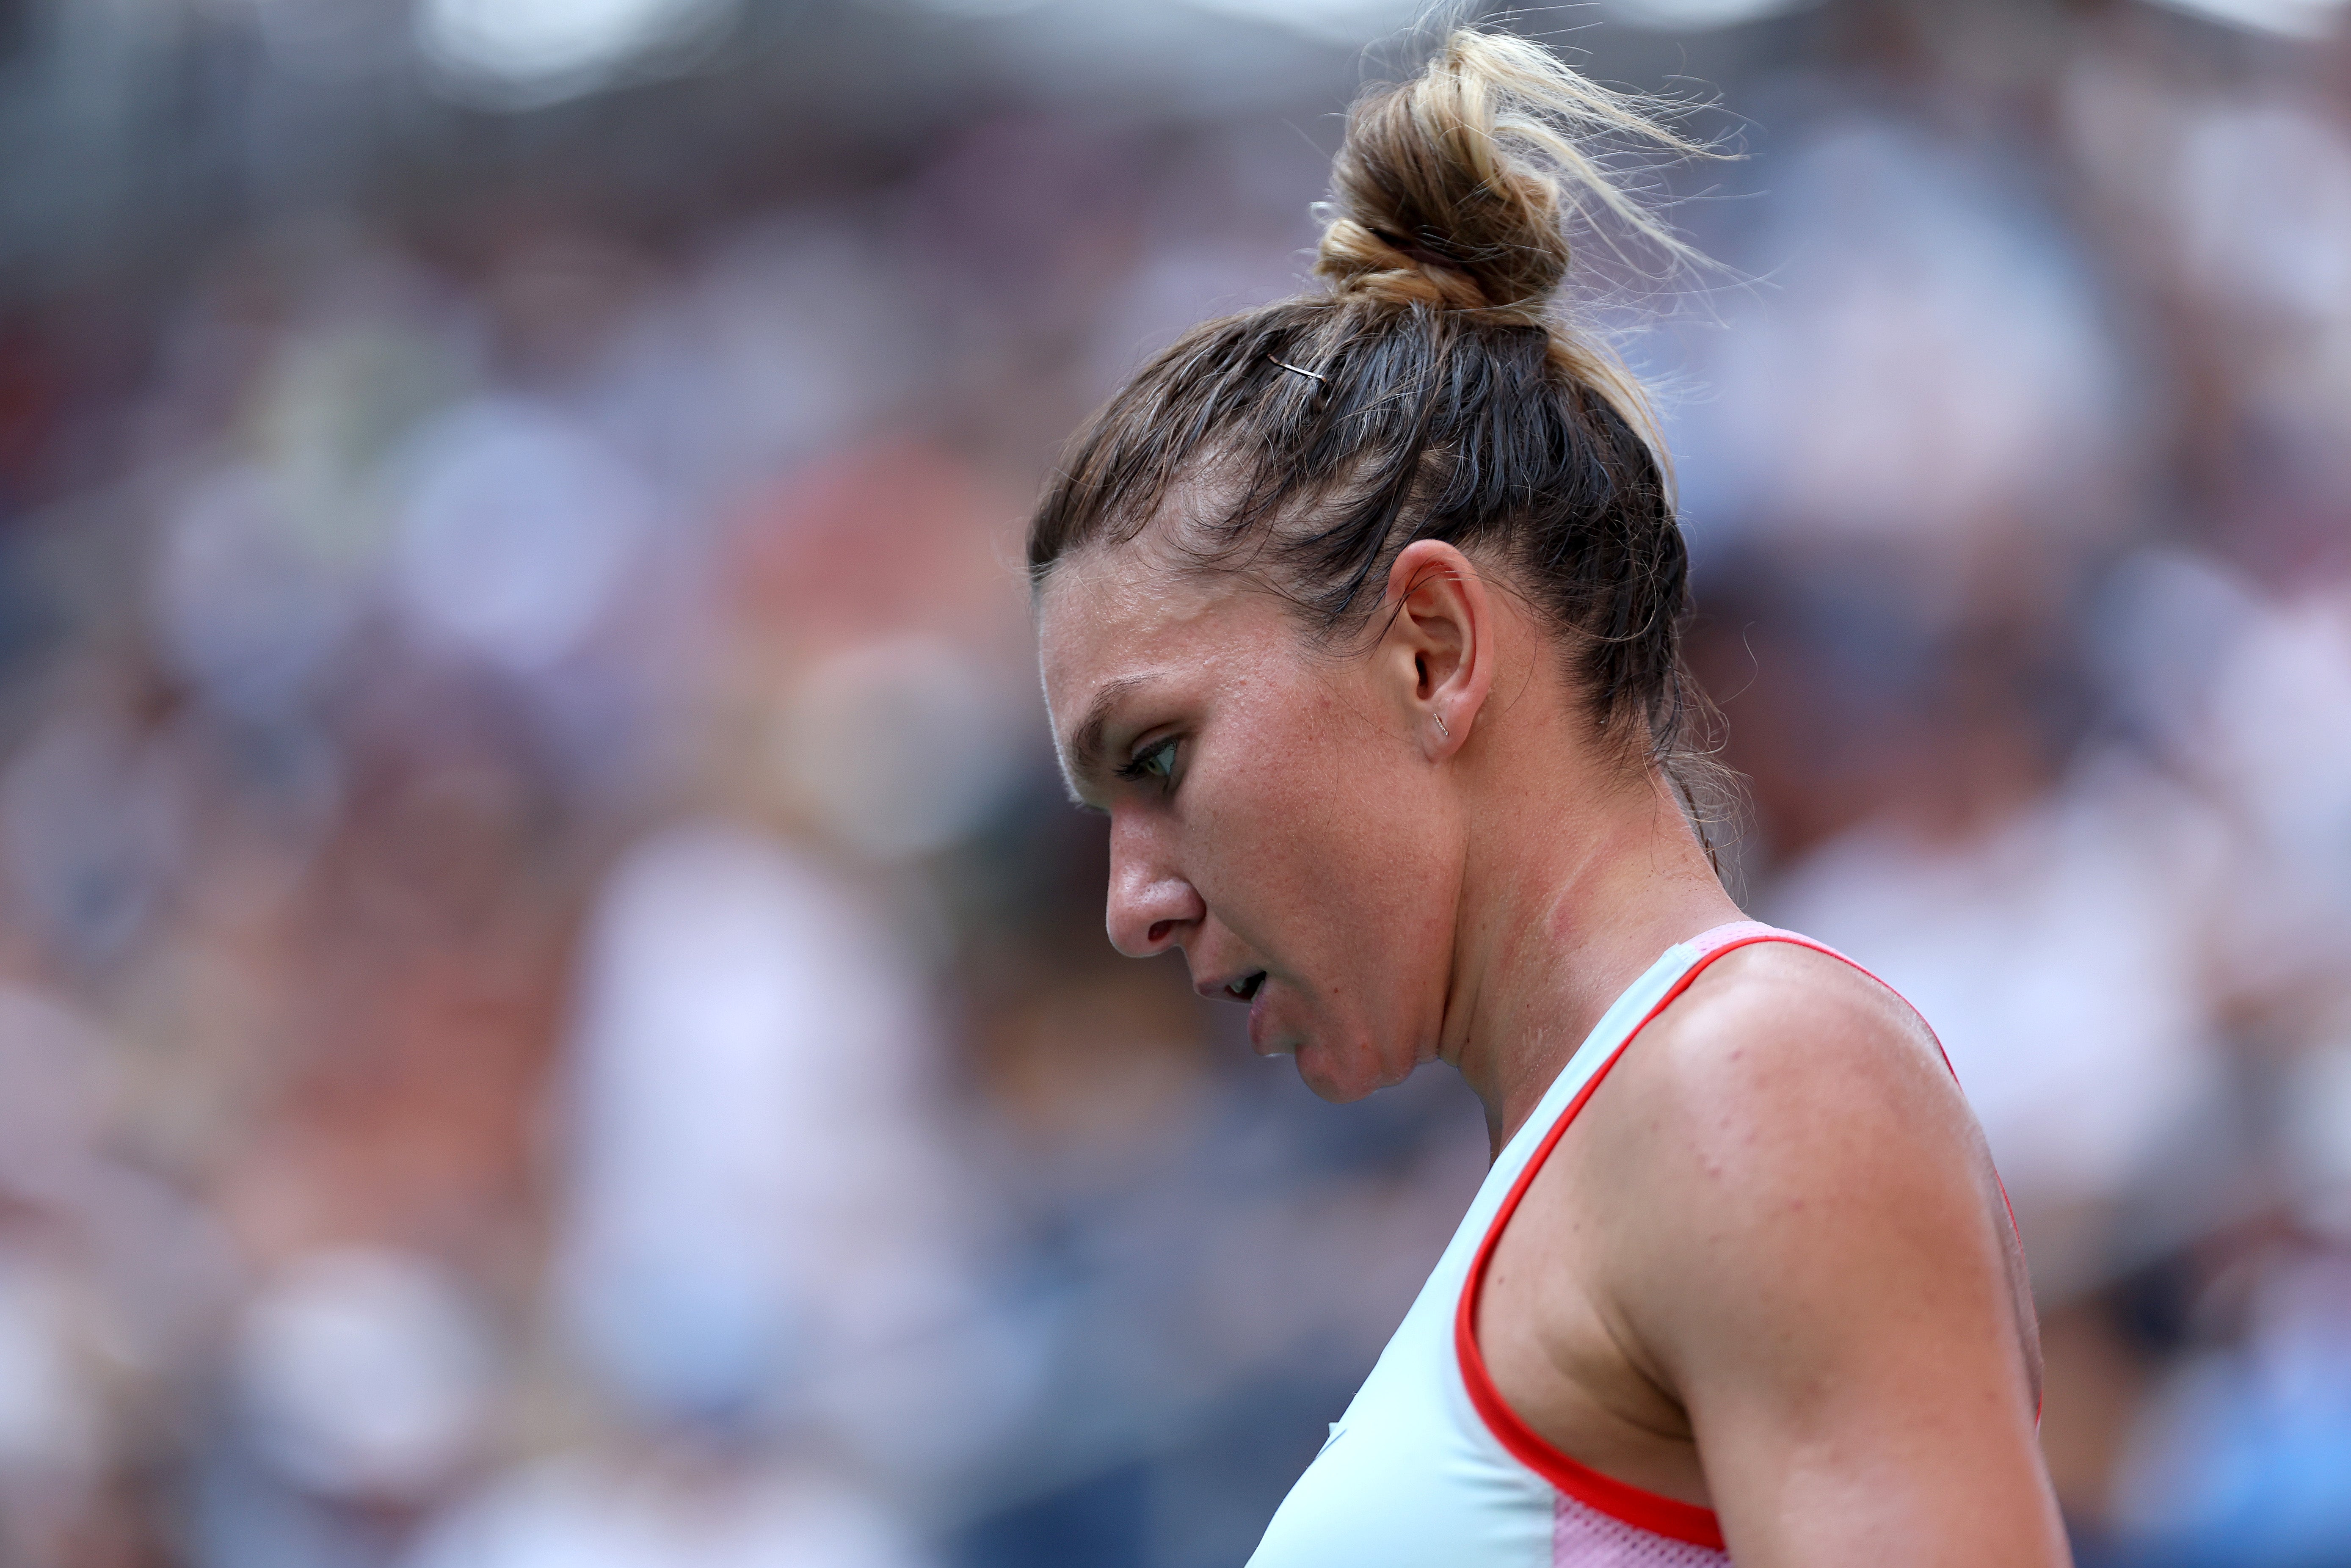 Halep was suspended after her first-round defeat at the US Open